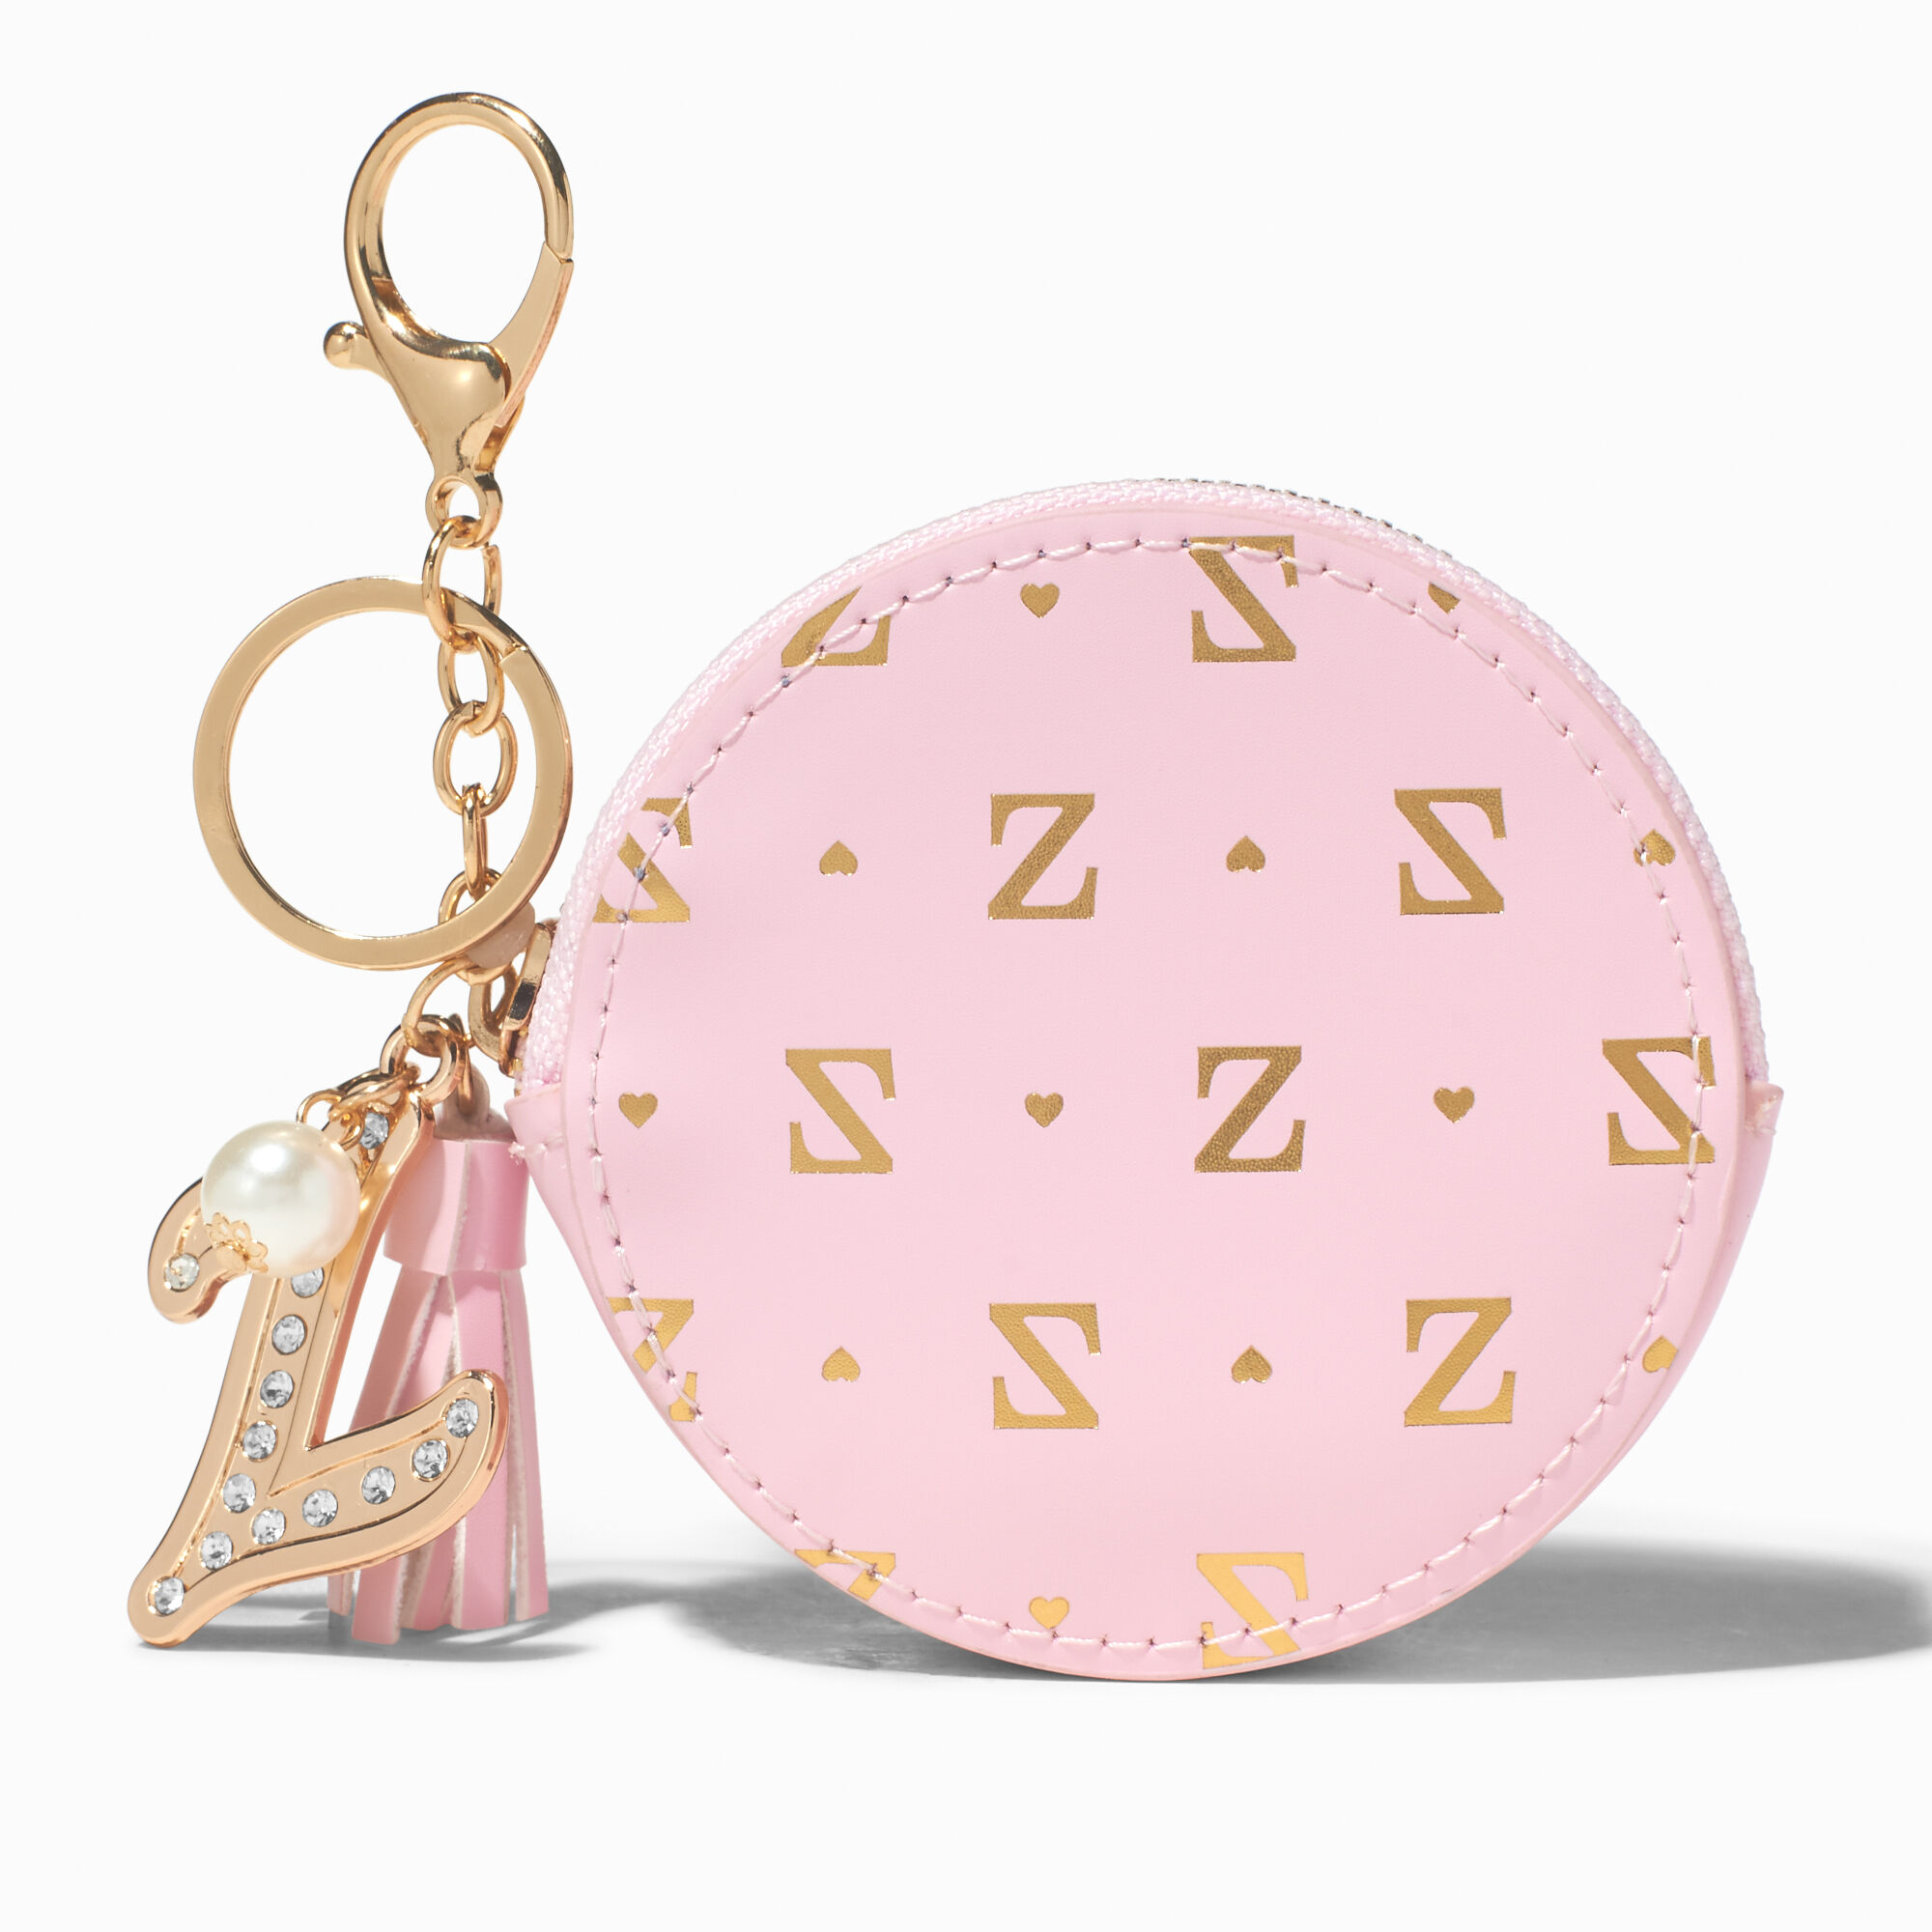 View Claires en Initial Coin Purse Z Gold information